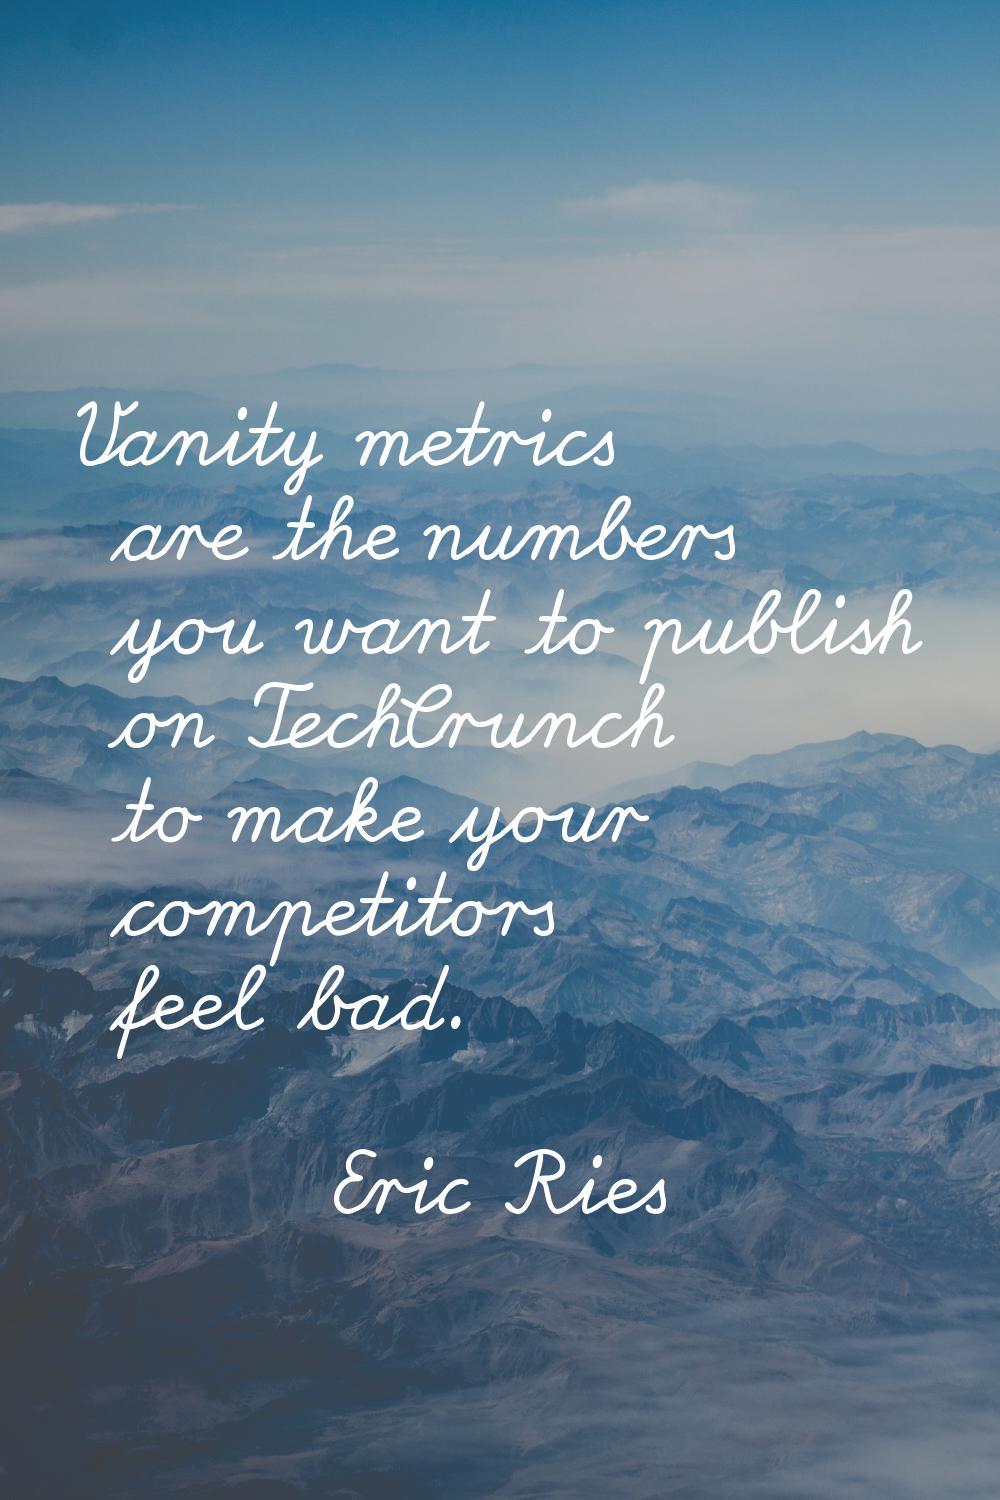 Vanity metrics are the numbers you want to publish on TechCrunch to make your competitors feel bad.